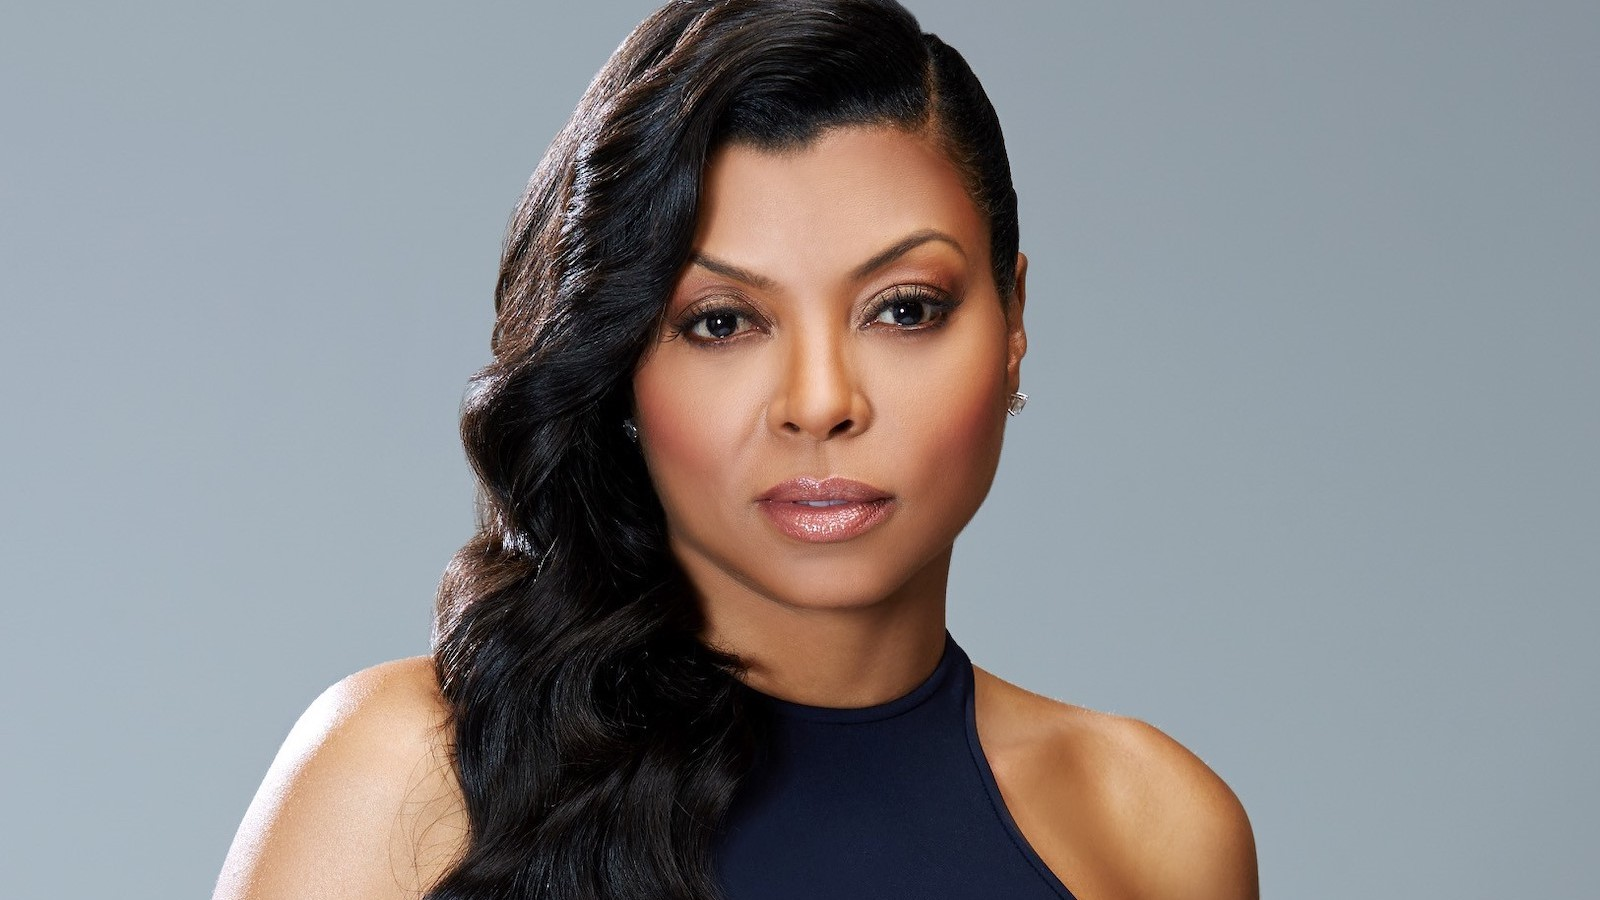 Taraji P. Henson Makes Directorial Debut With High School Comedy ‘Two-Faced’